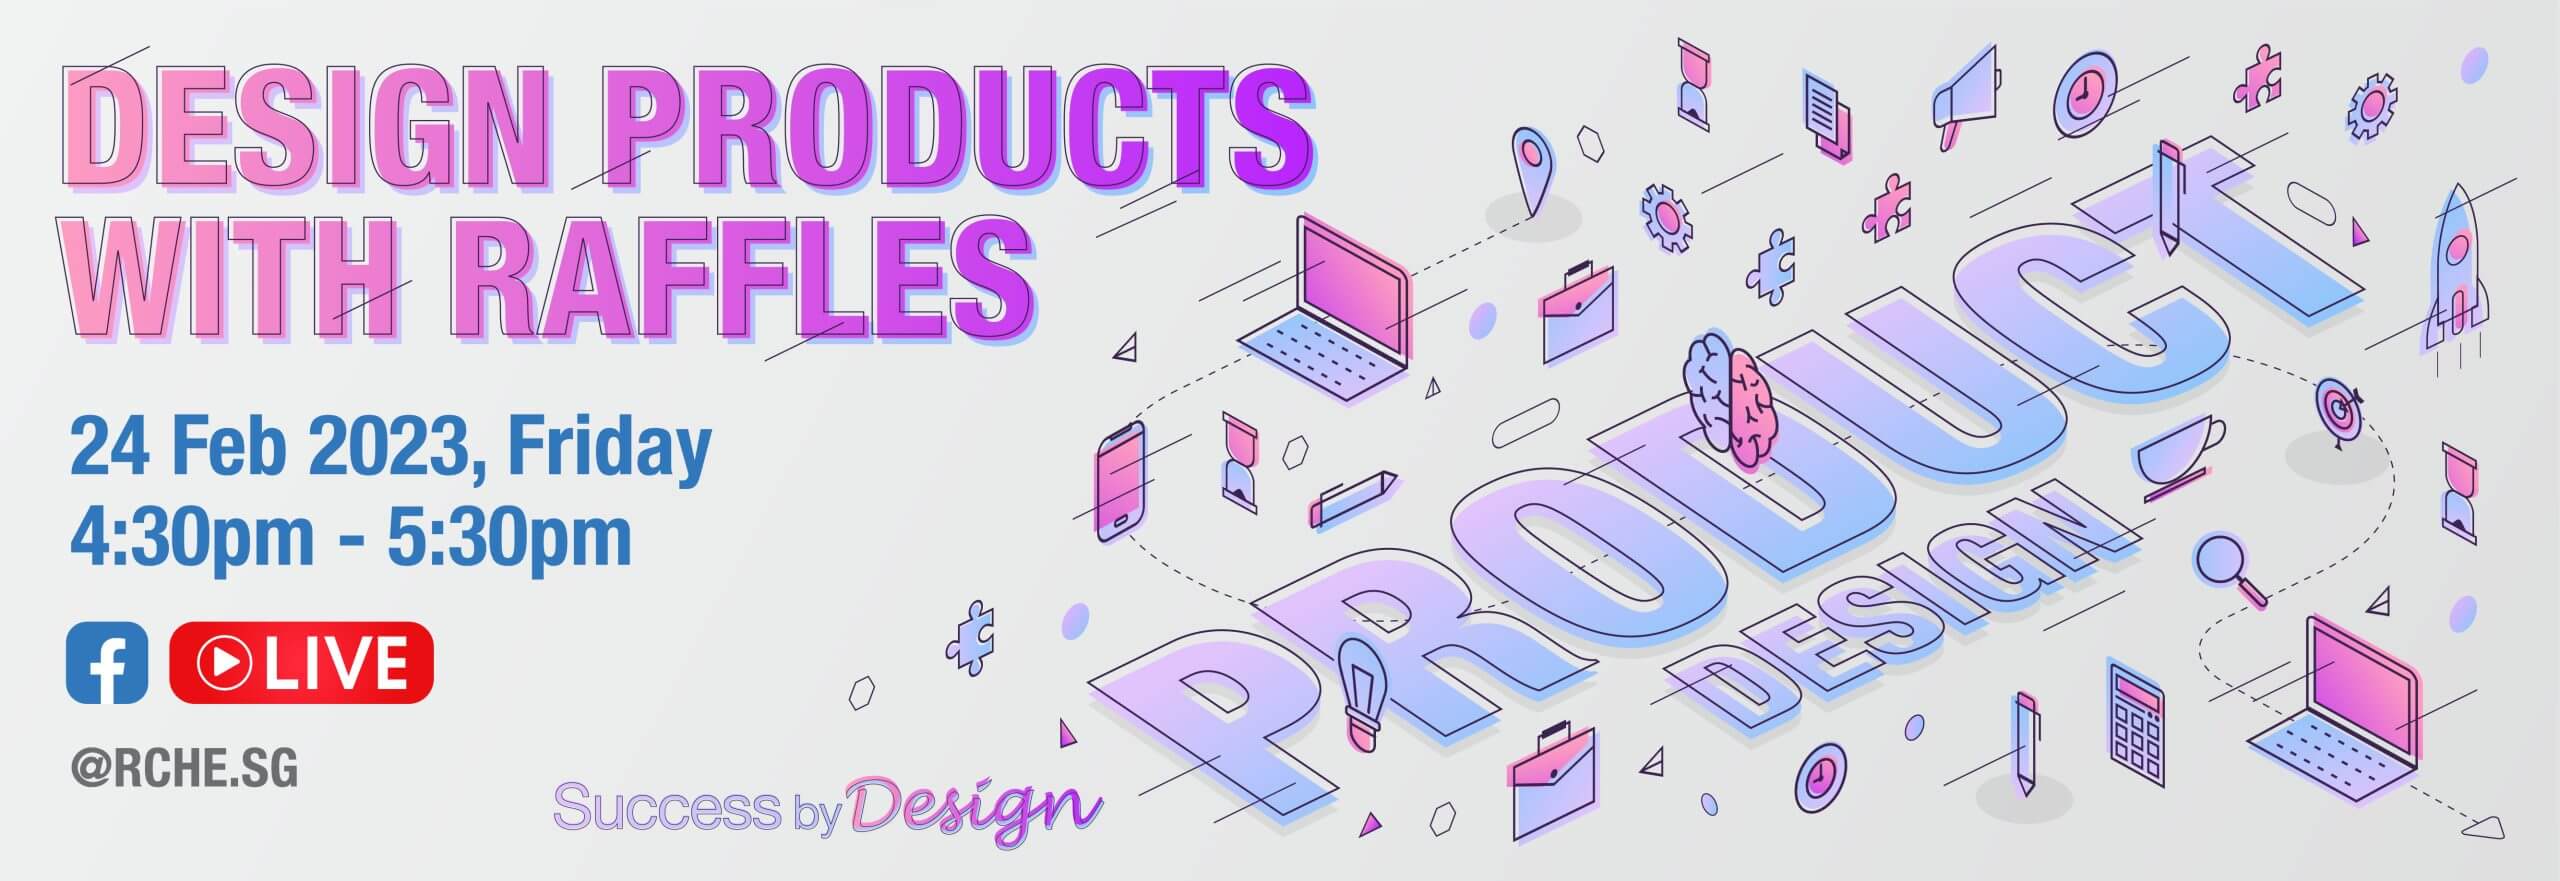 Design Products with Raffles Microsite Banner v1